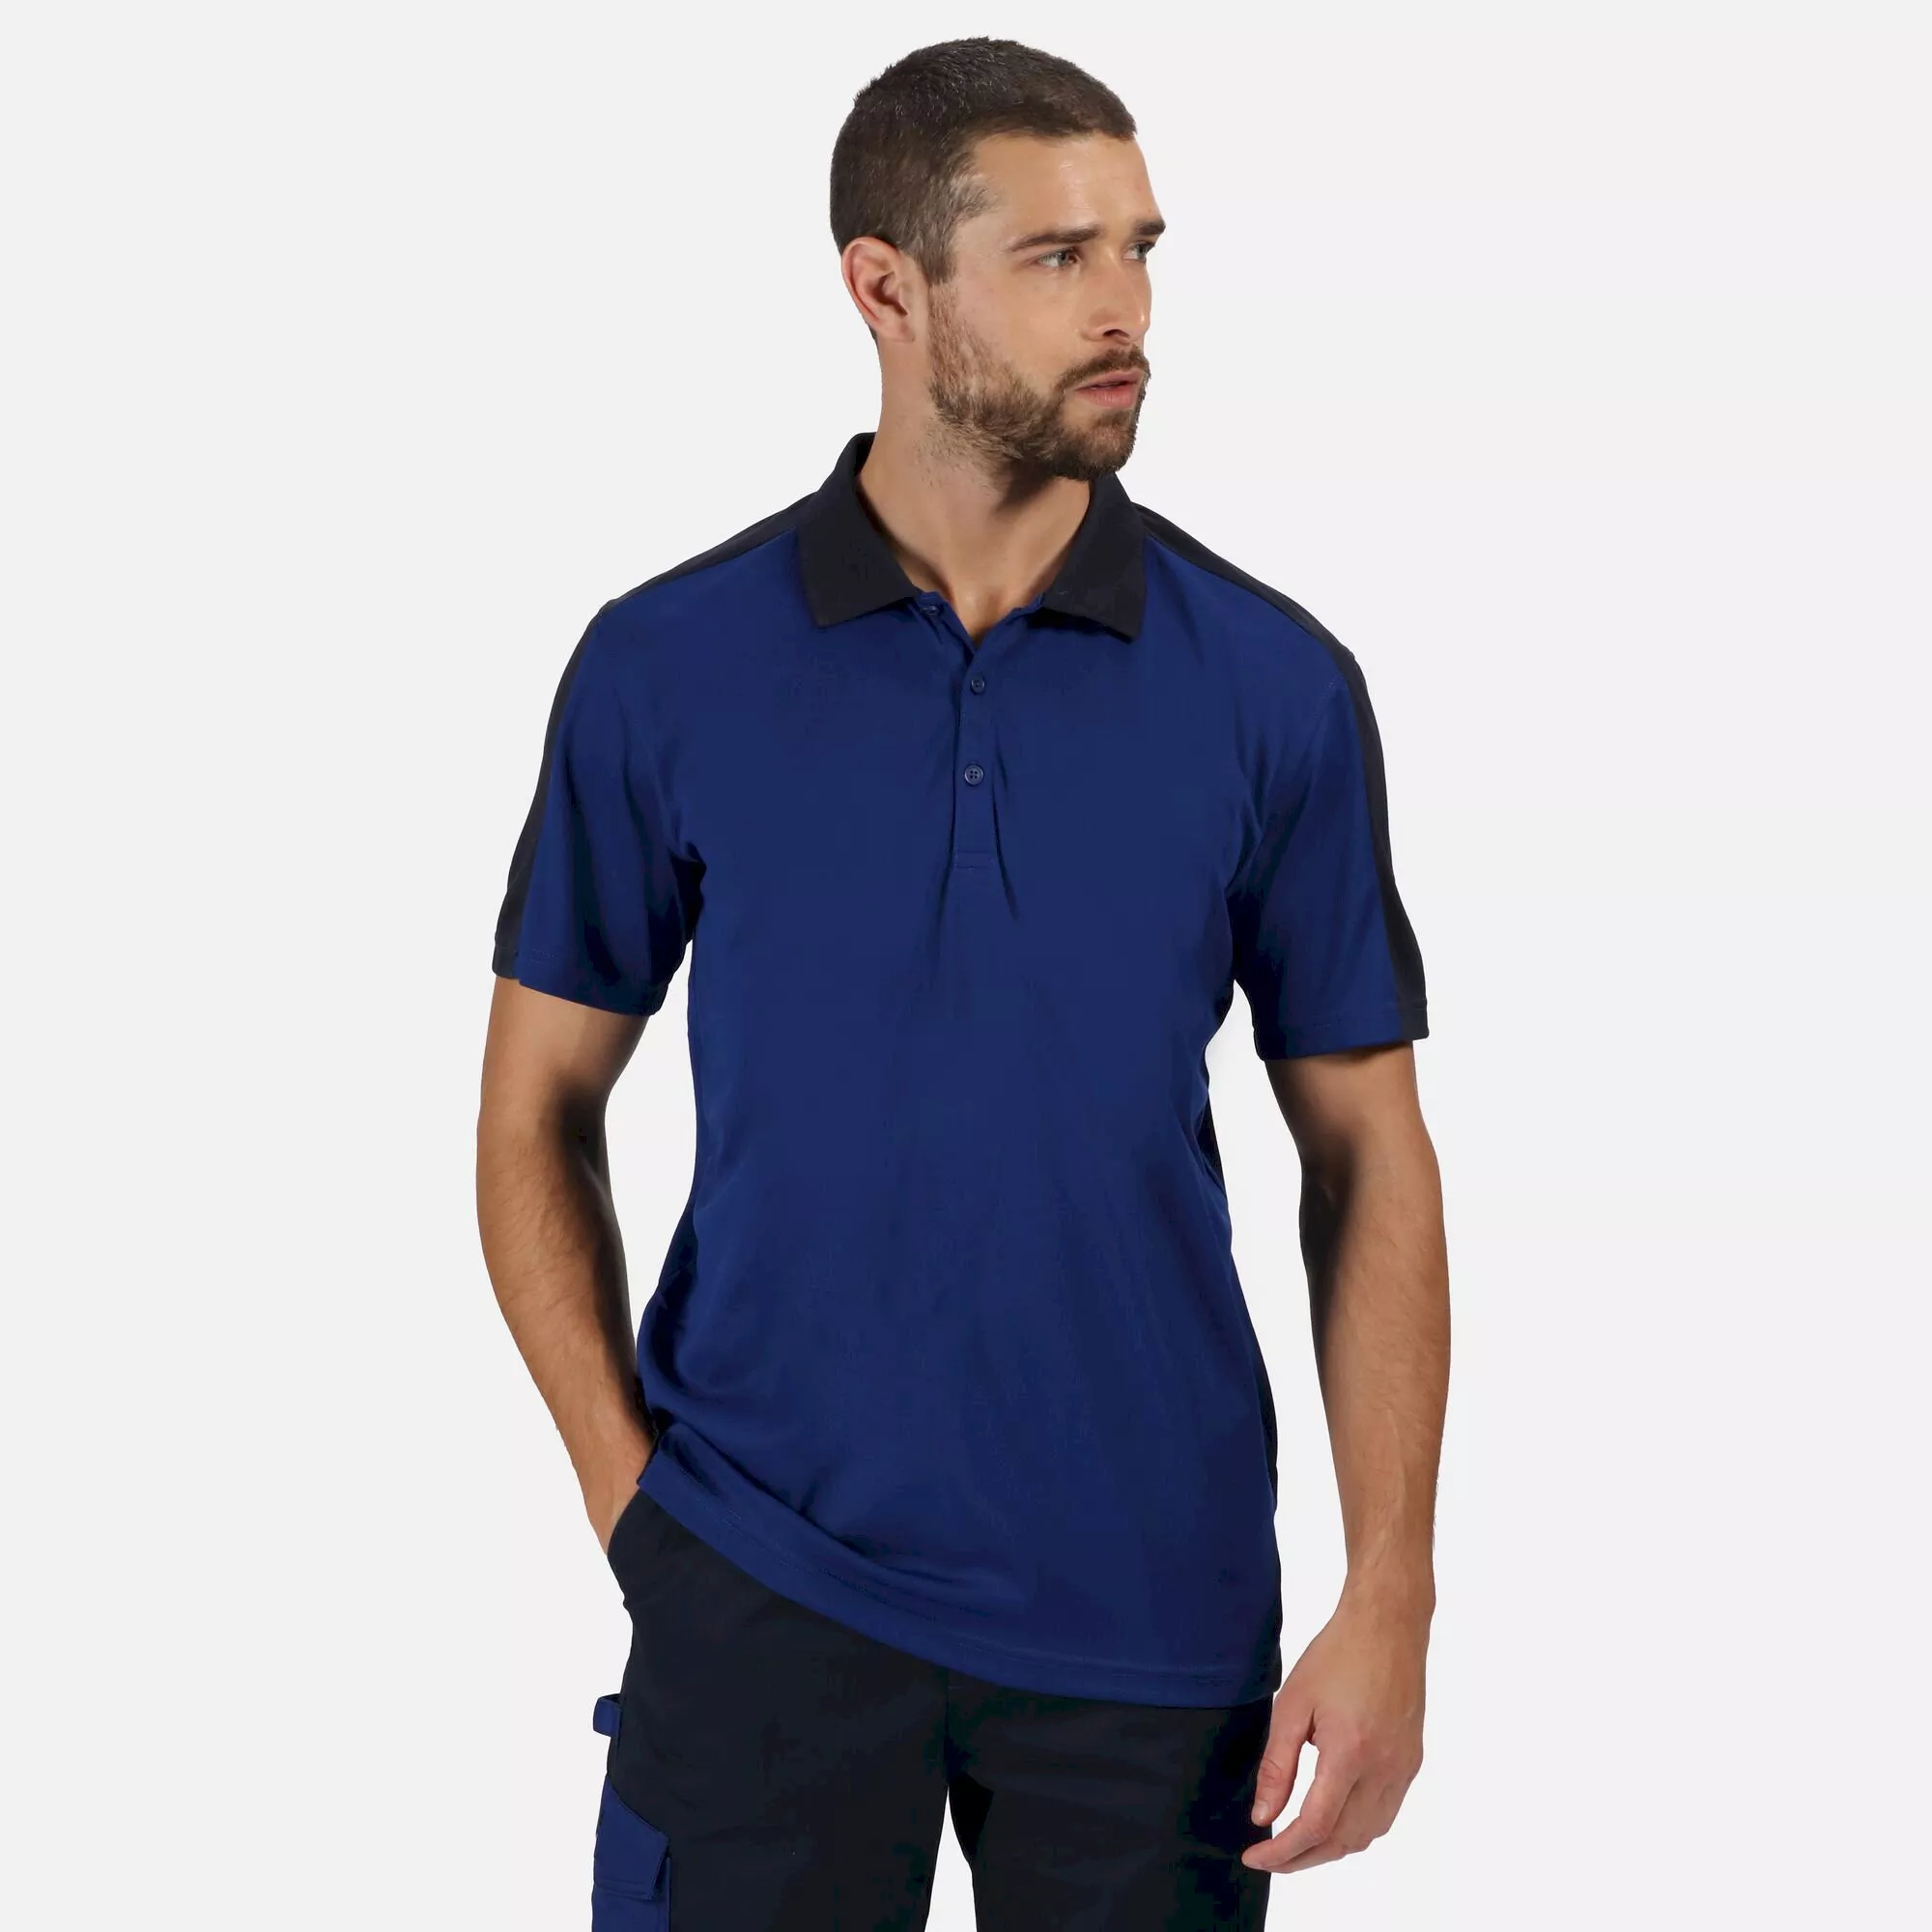 Men's Contrast Coolweave Quick Wicking Polo Shirt - New Royal Navy